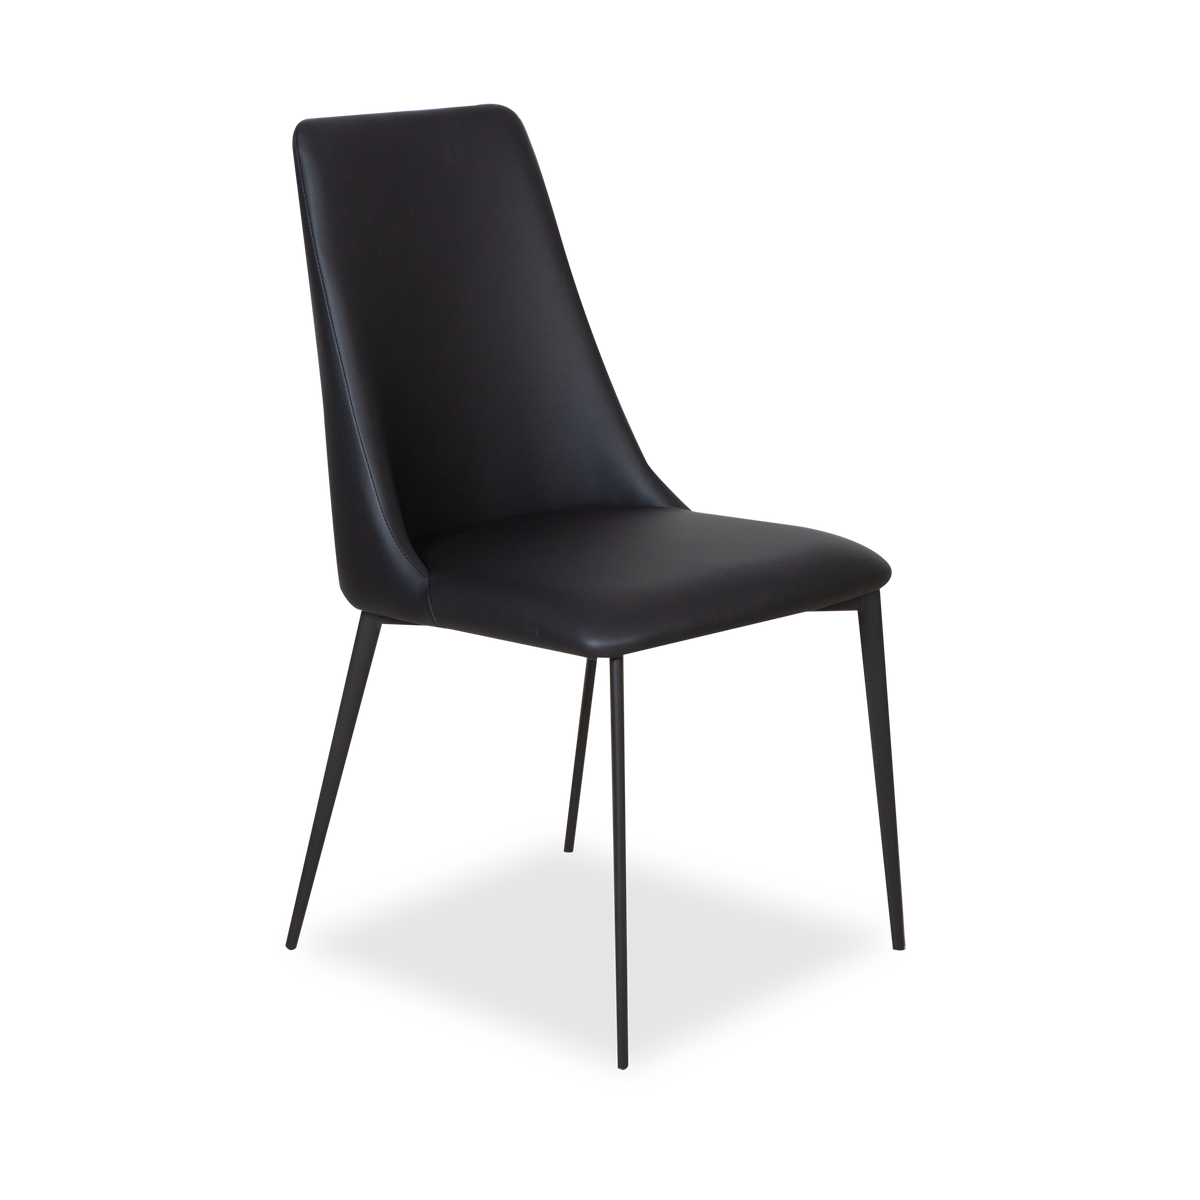 With its sharp silhouette, the Jordie Side Chair offers an elevated versatile style.